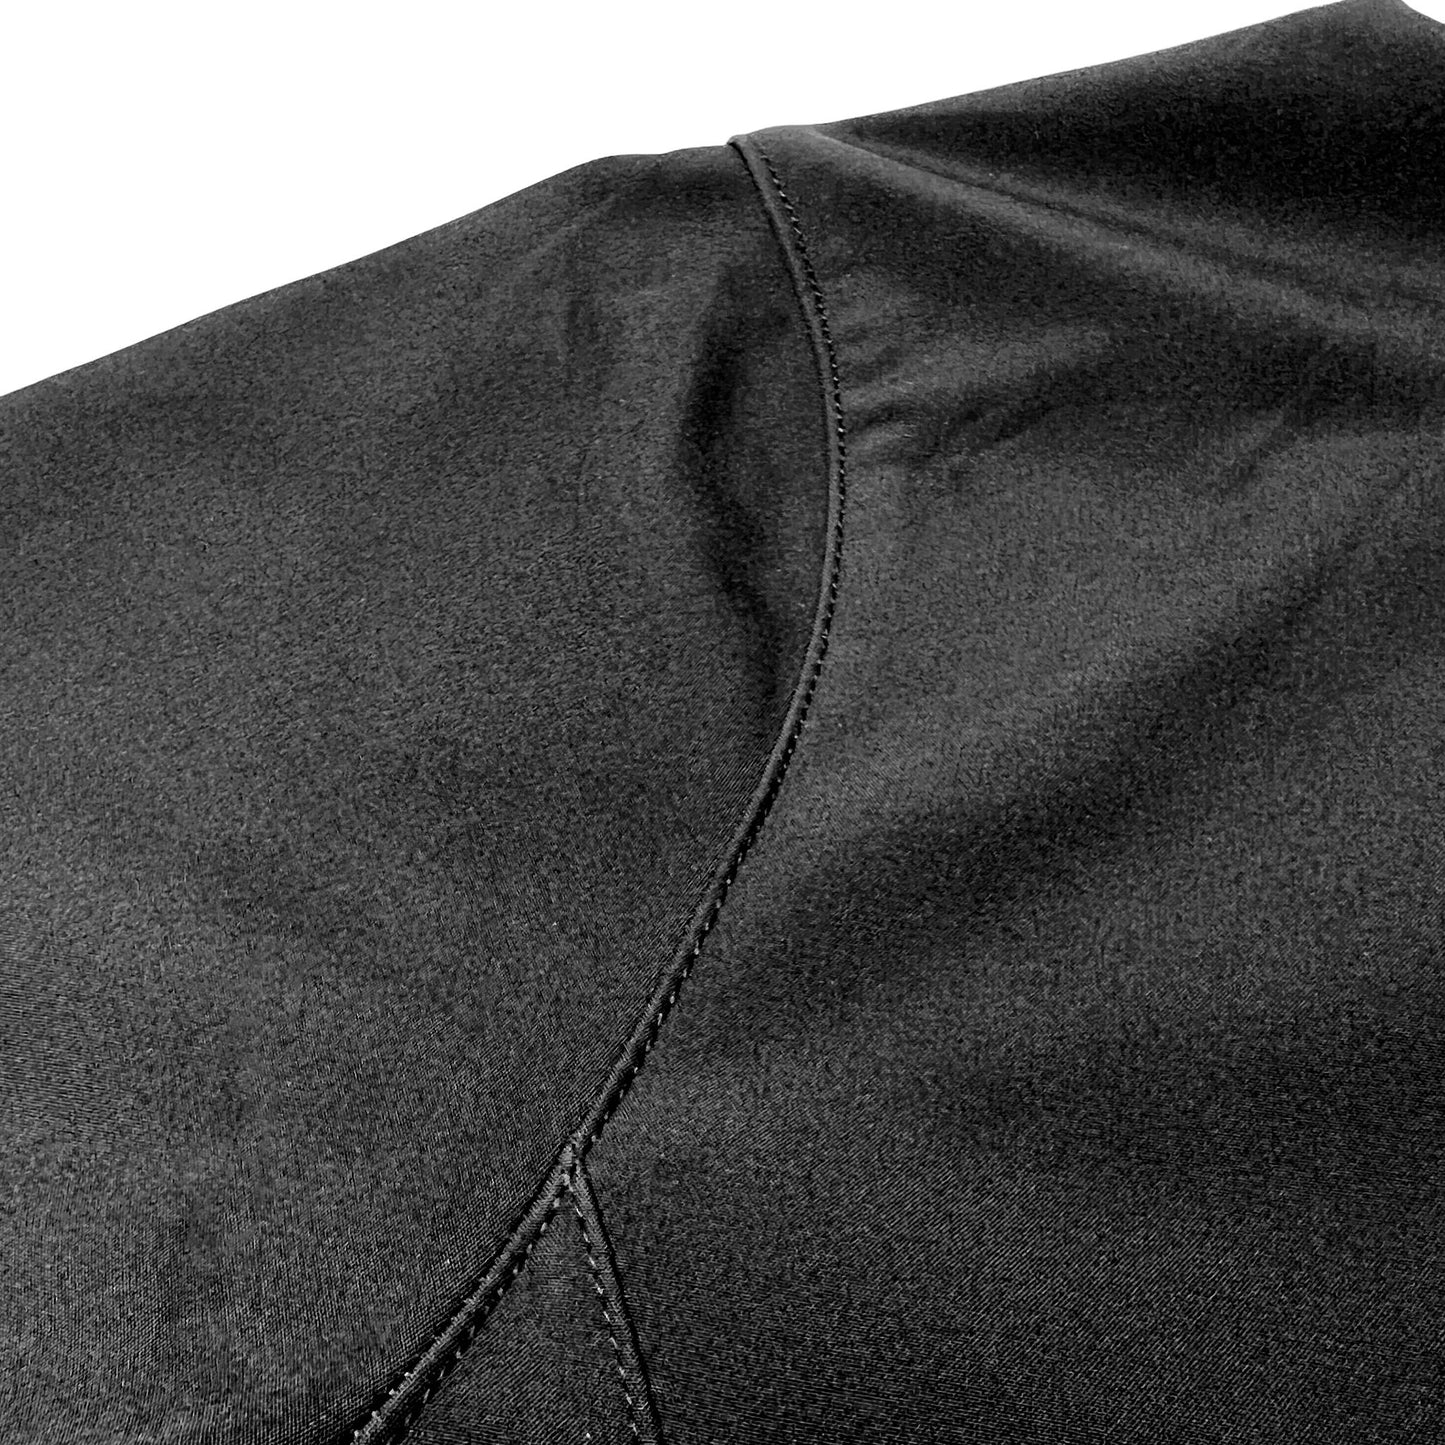 [POLICE] Soft Shell Jacket [BLK/BLK]-13 Fifty Apparel